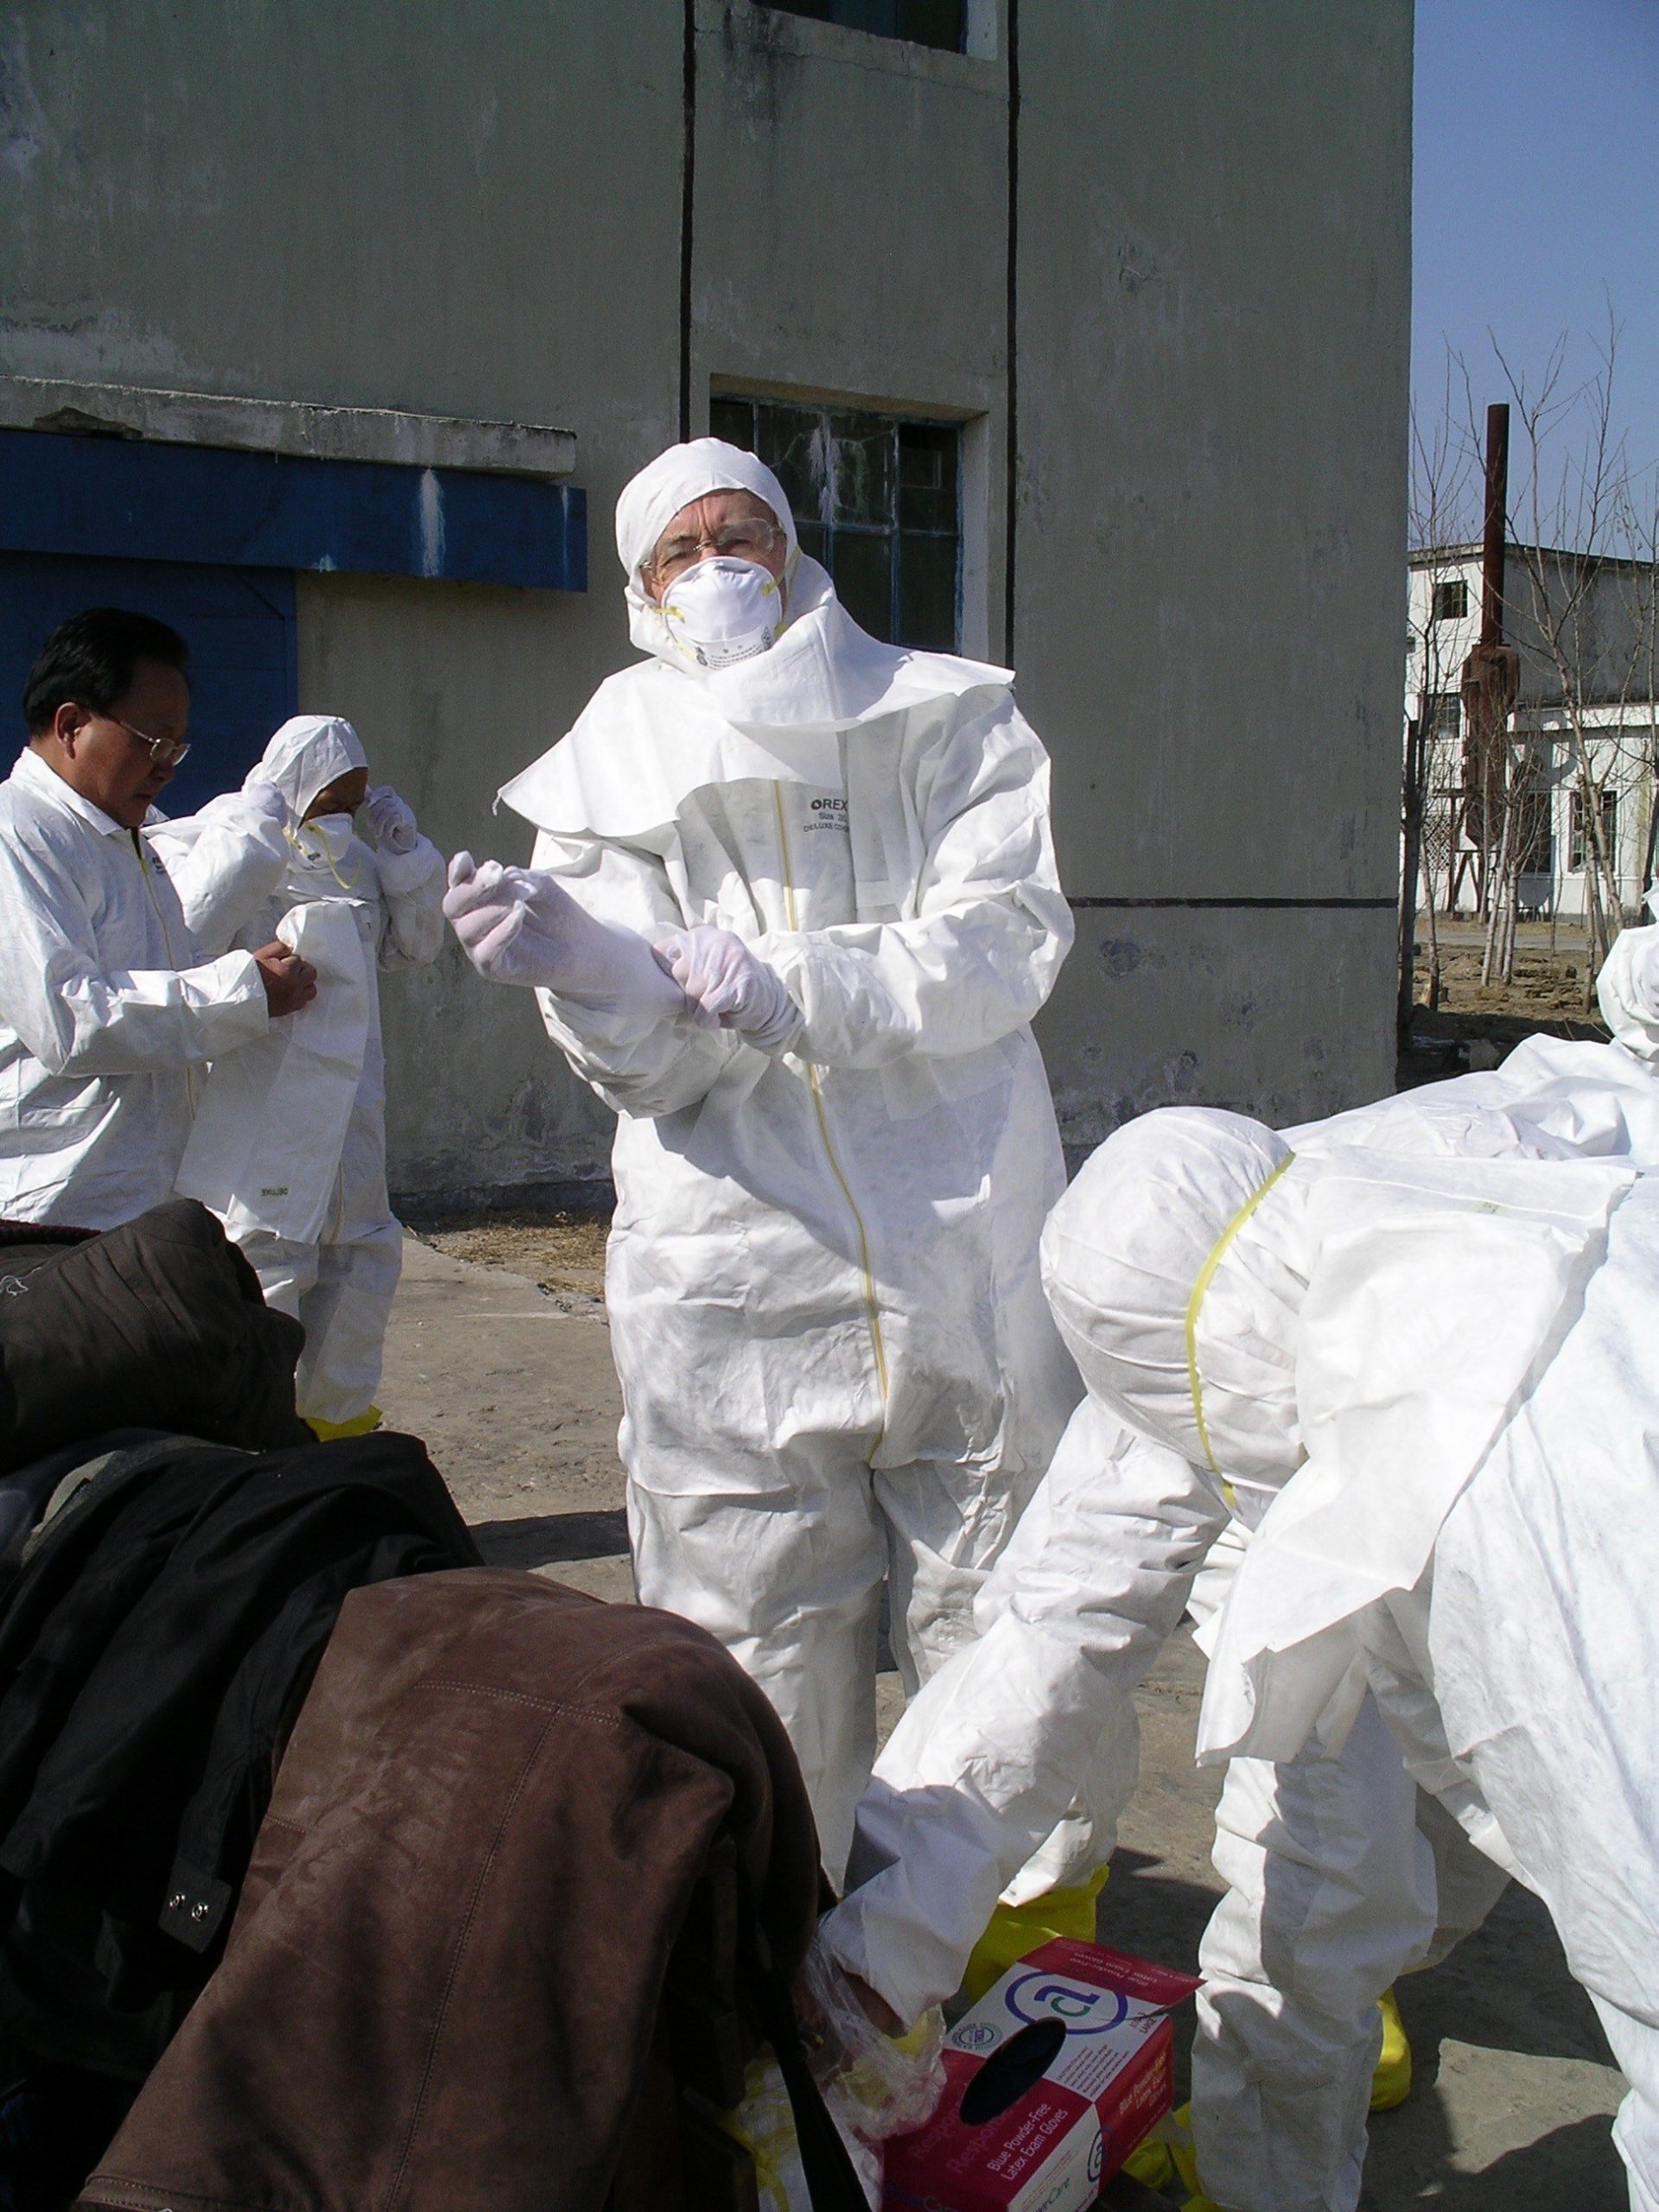 Man donning protective gloves and already in full anti-c suit standing outside with other people adjusting their suits nearby